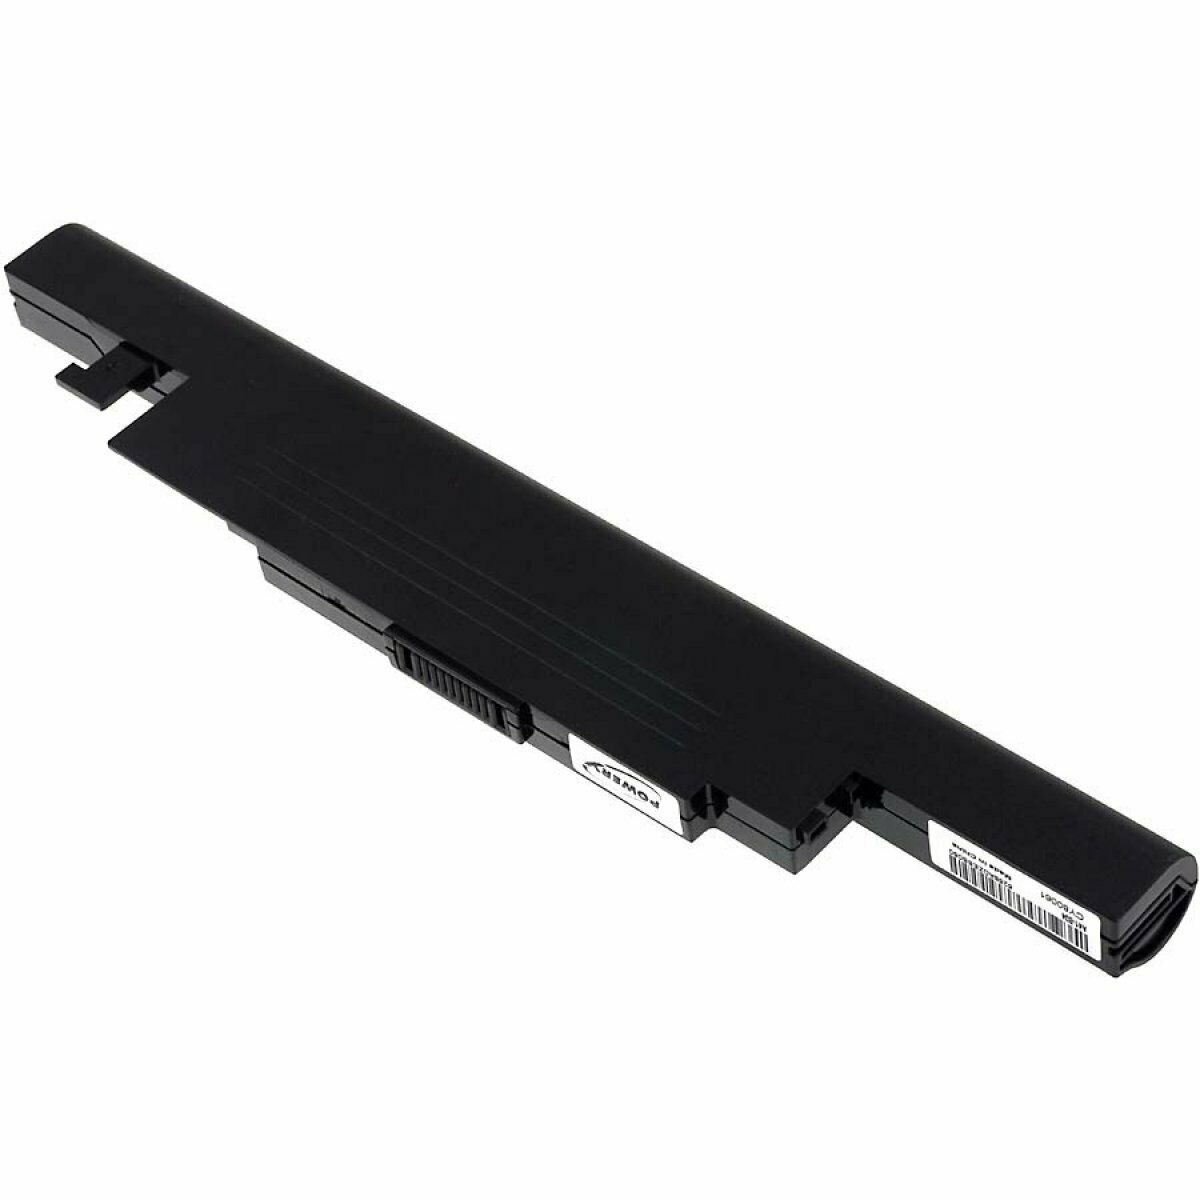 Accu voor A41-B34 A32-B34 Pegatron B34FB B34FD B34YA C15B(90N0-CN2S310) Haier S500(compatible)